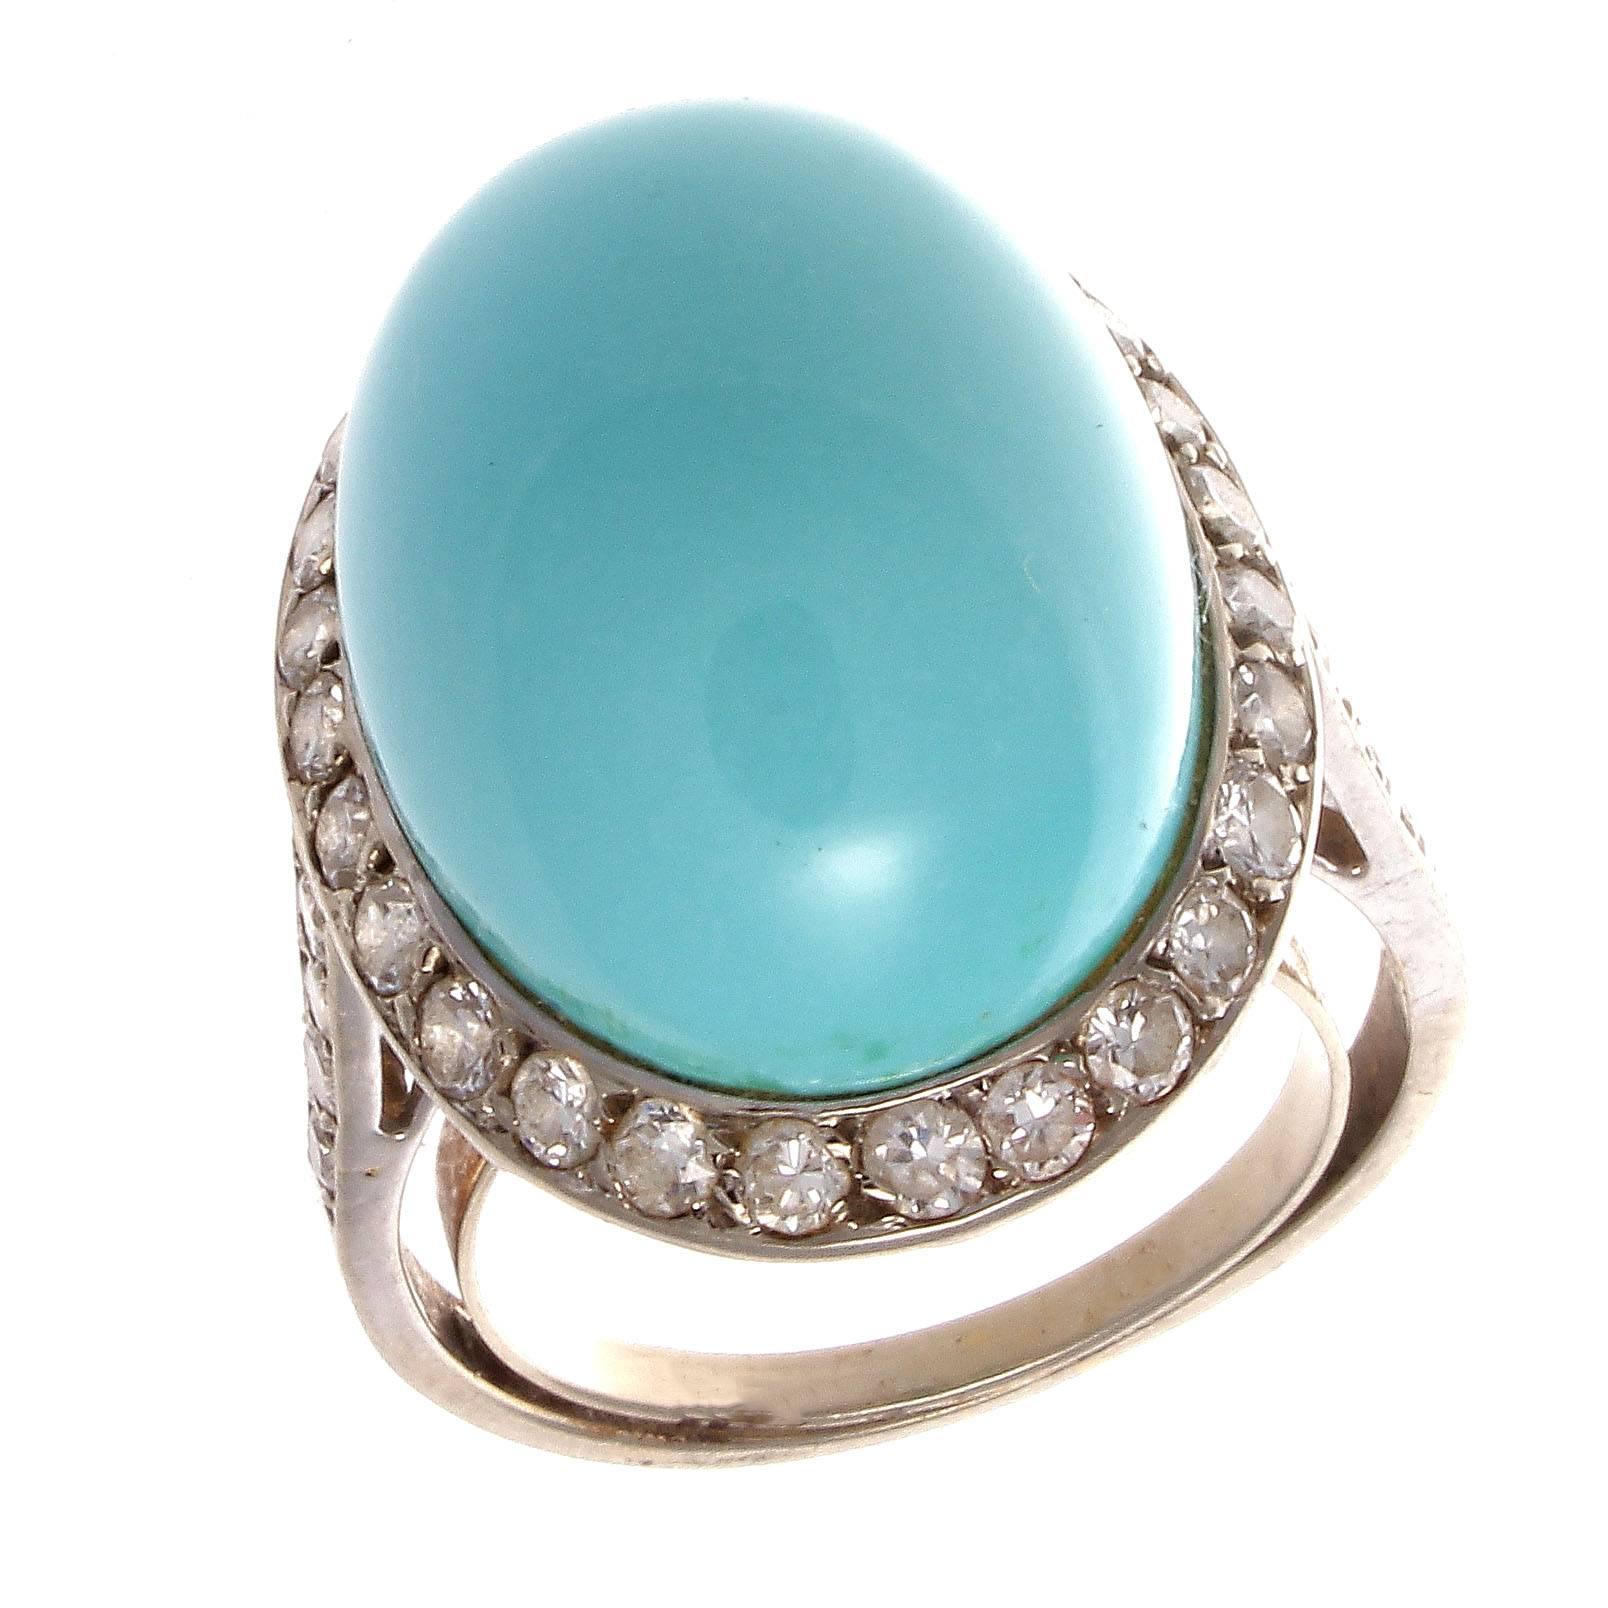 A symbol of purity because of its serene color mimicking the infinite blue of the sky. The ancient Egyptians believed that Turquoise is one of the most powerful metaphysical healing stones. The brilliance of this ring stems from vibrant colors and